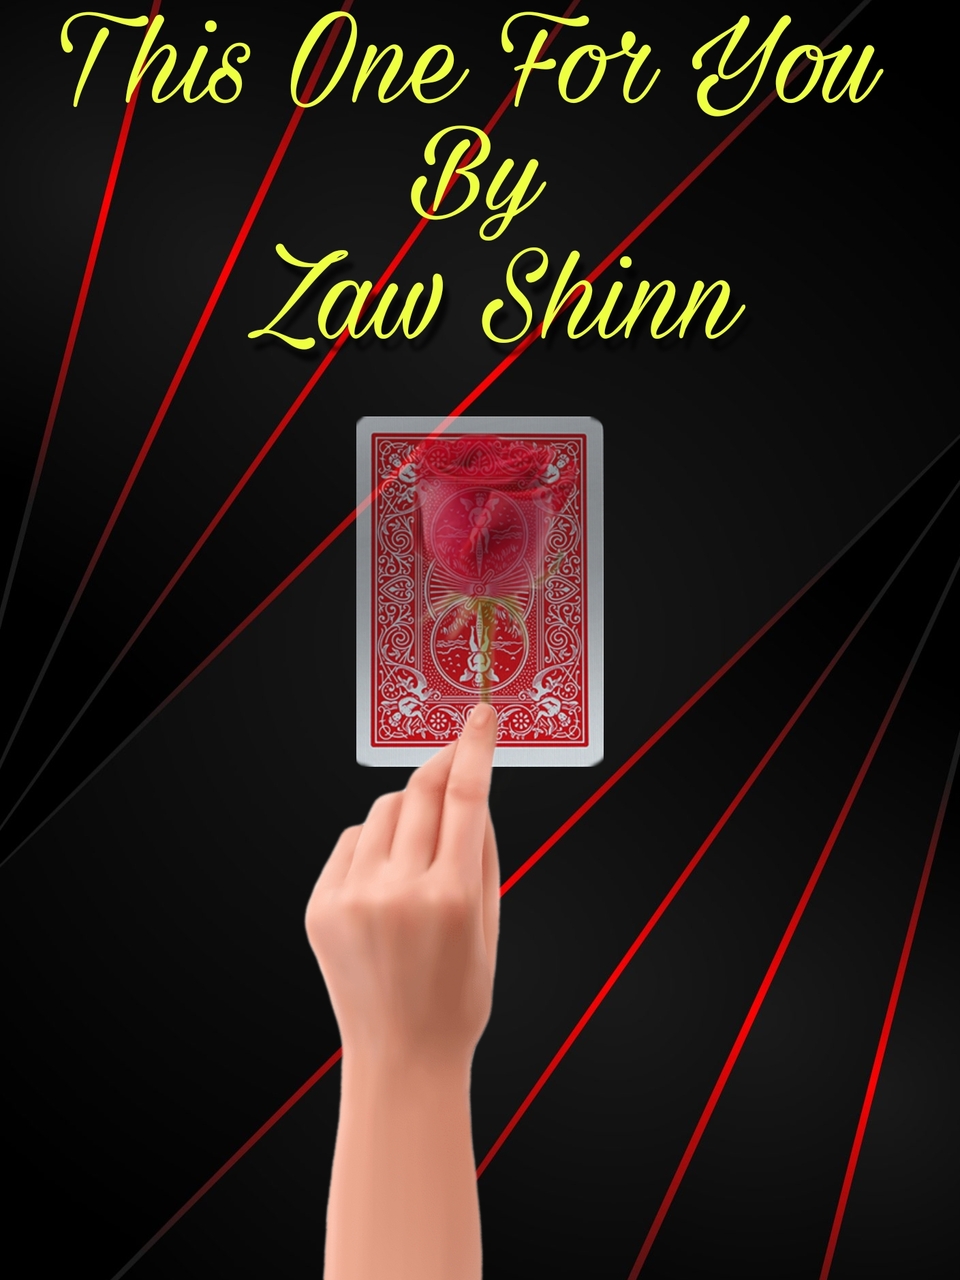 This One For You by Zaw Shinn (Mp4 Video Download)